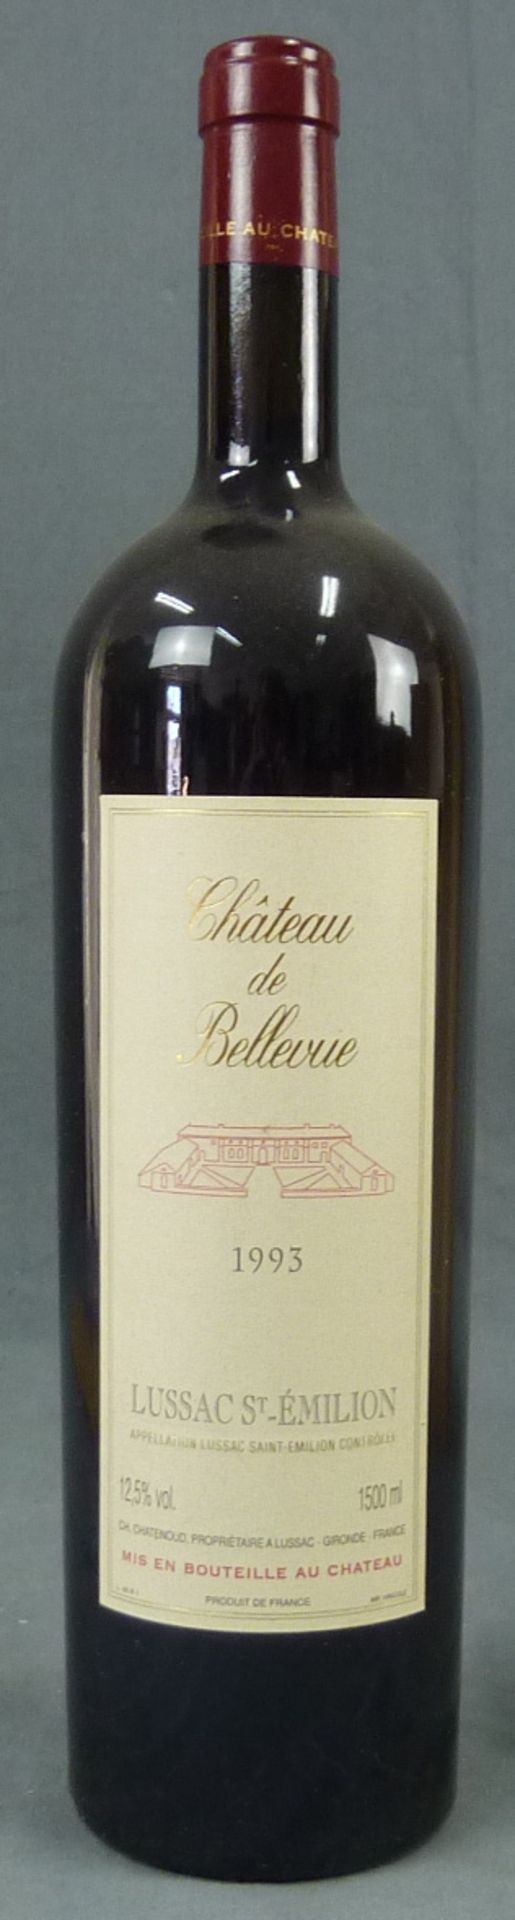 Interesting lot of aged Bordeaux red wine. White wine. France.2015 Chateau de Bellevue Lussac St- - Image 2 of 11